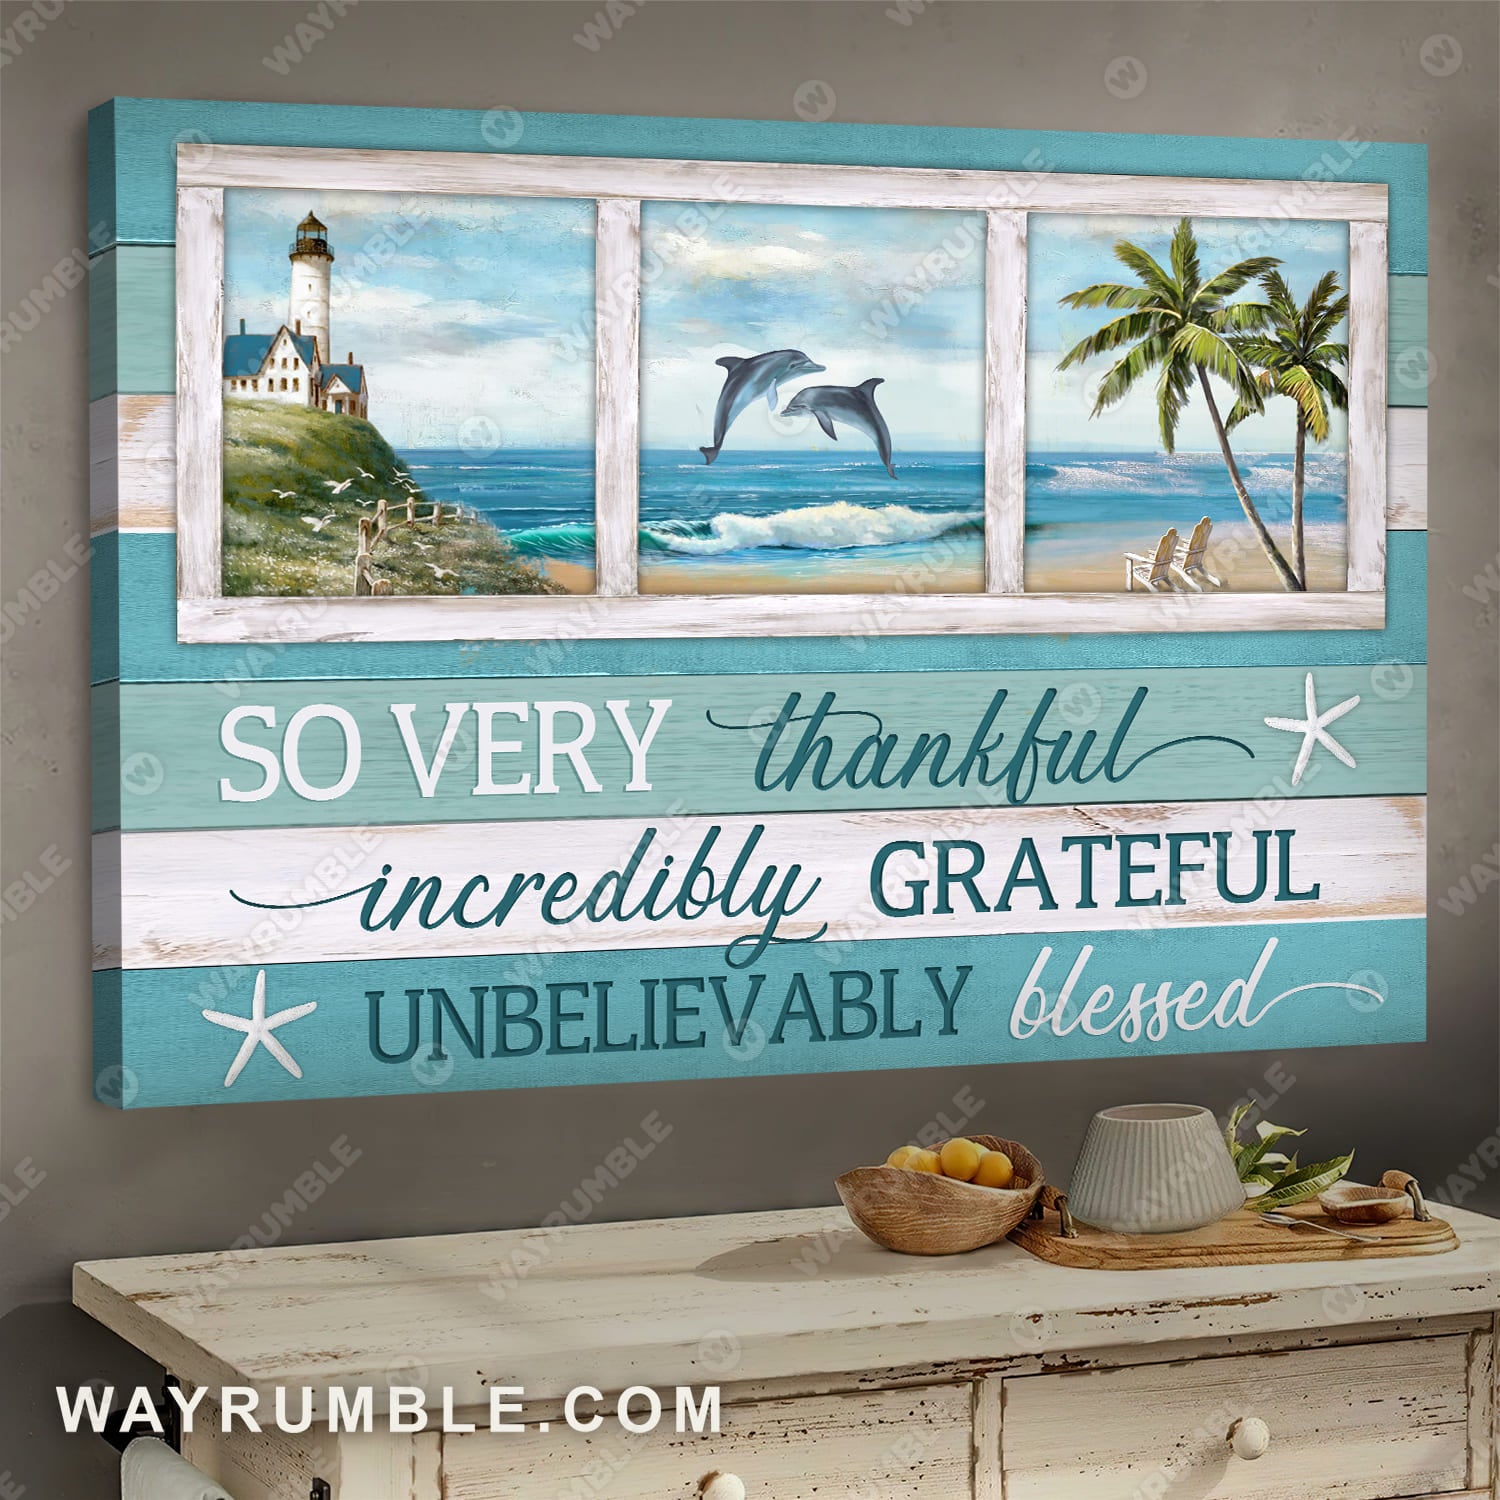 Dolphin drawing, Blue beach, So very thankful incredibly grateful - Jesus Landscape Canvas Prints, Wall Art